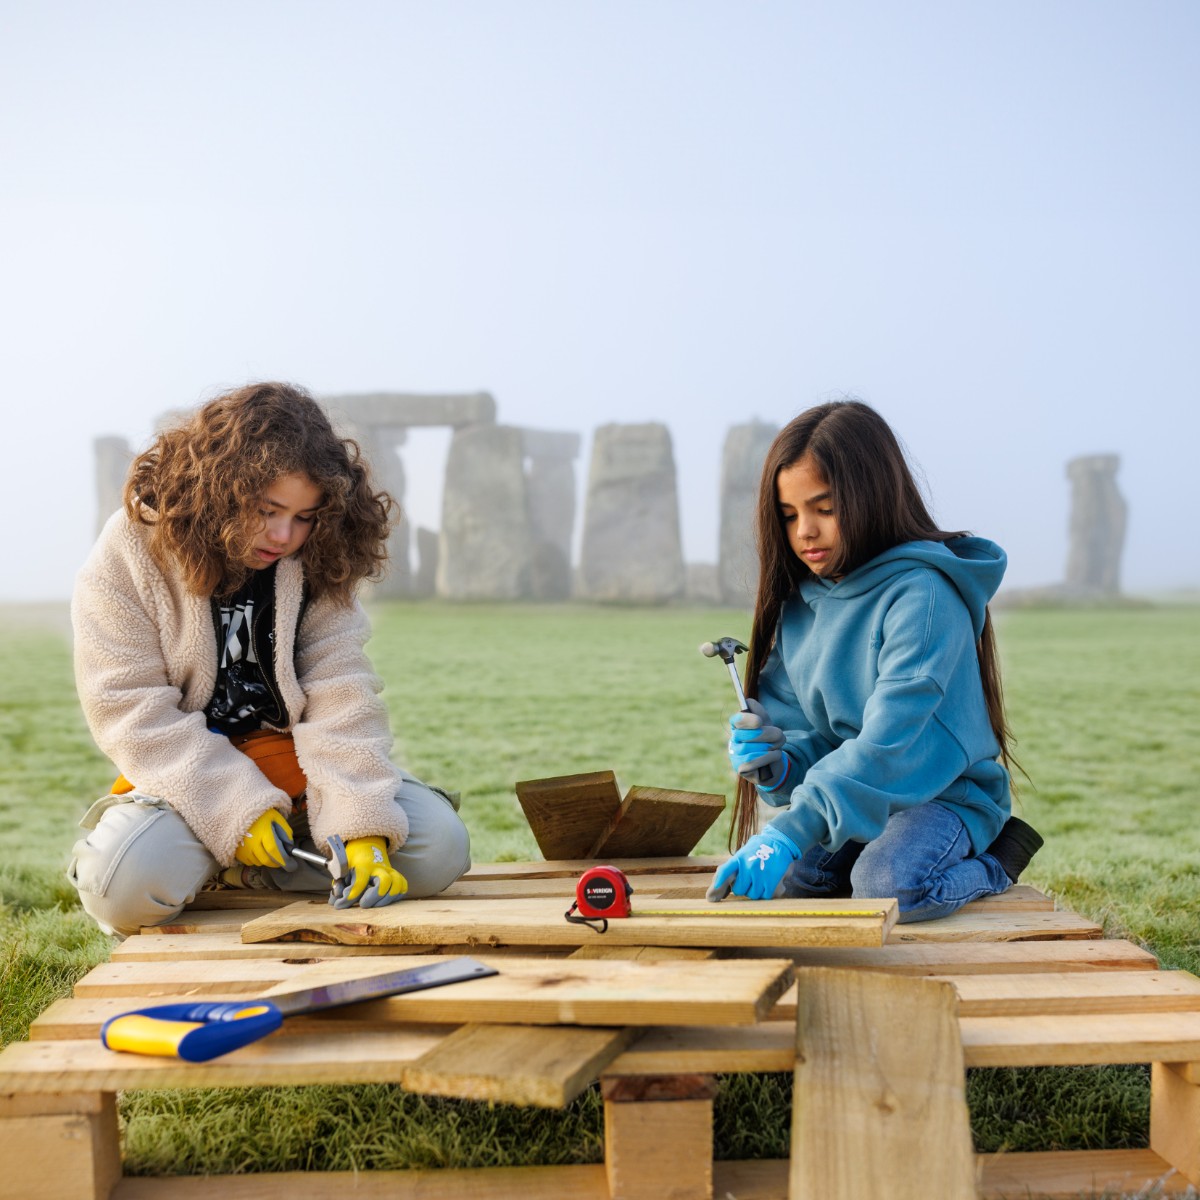 Playhenge begins next week! 🔨 Join us for the ultimate outdoor construction experience. We cannot wait to see children’s ideas come to life! 💡 📆 17 May - 4 June (excluding Thursdays), 10am – 5pm. Pre-booking required. Find out more ➡️ bit.ly/Playhenge